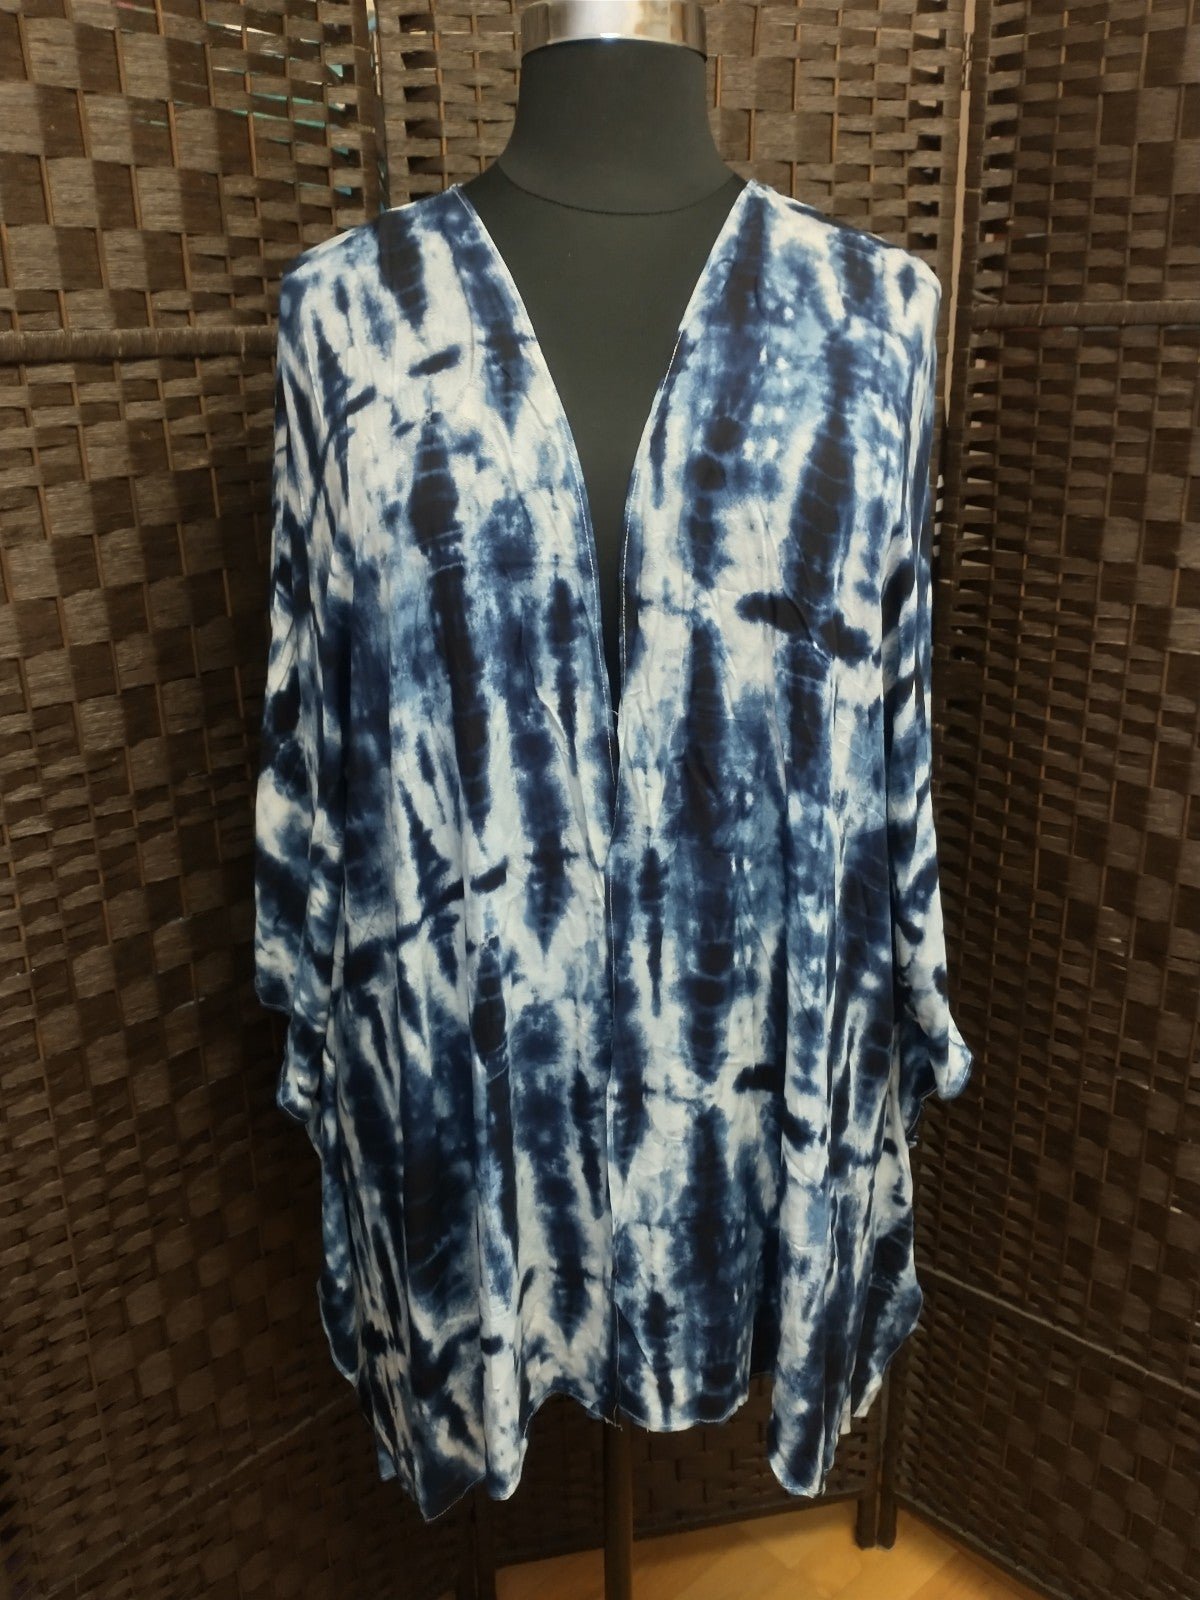 cheapest place to buy  One Size NWT Kimono Blue/Navy/Wh